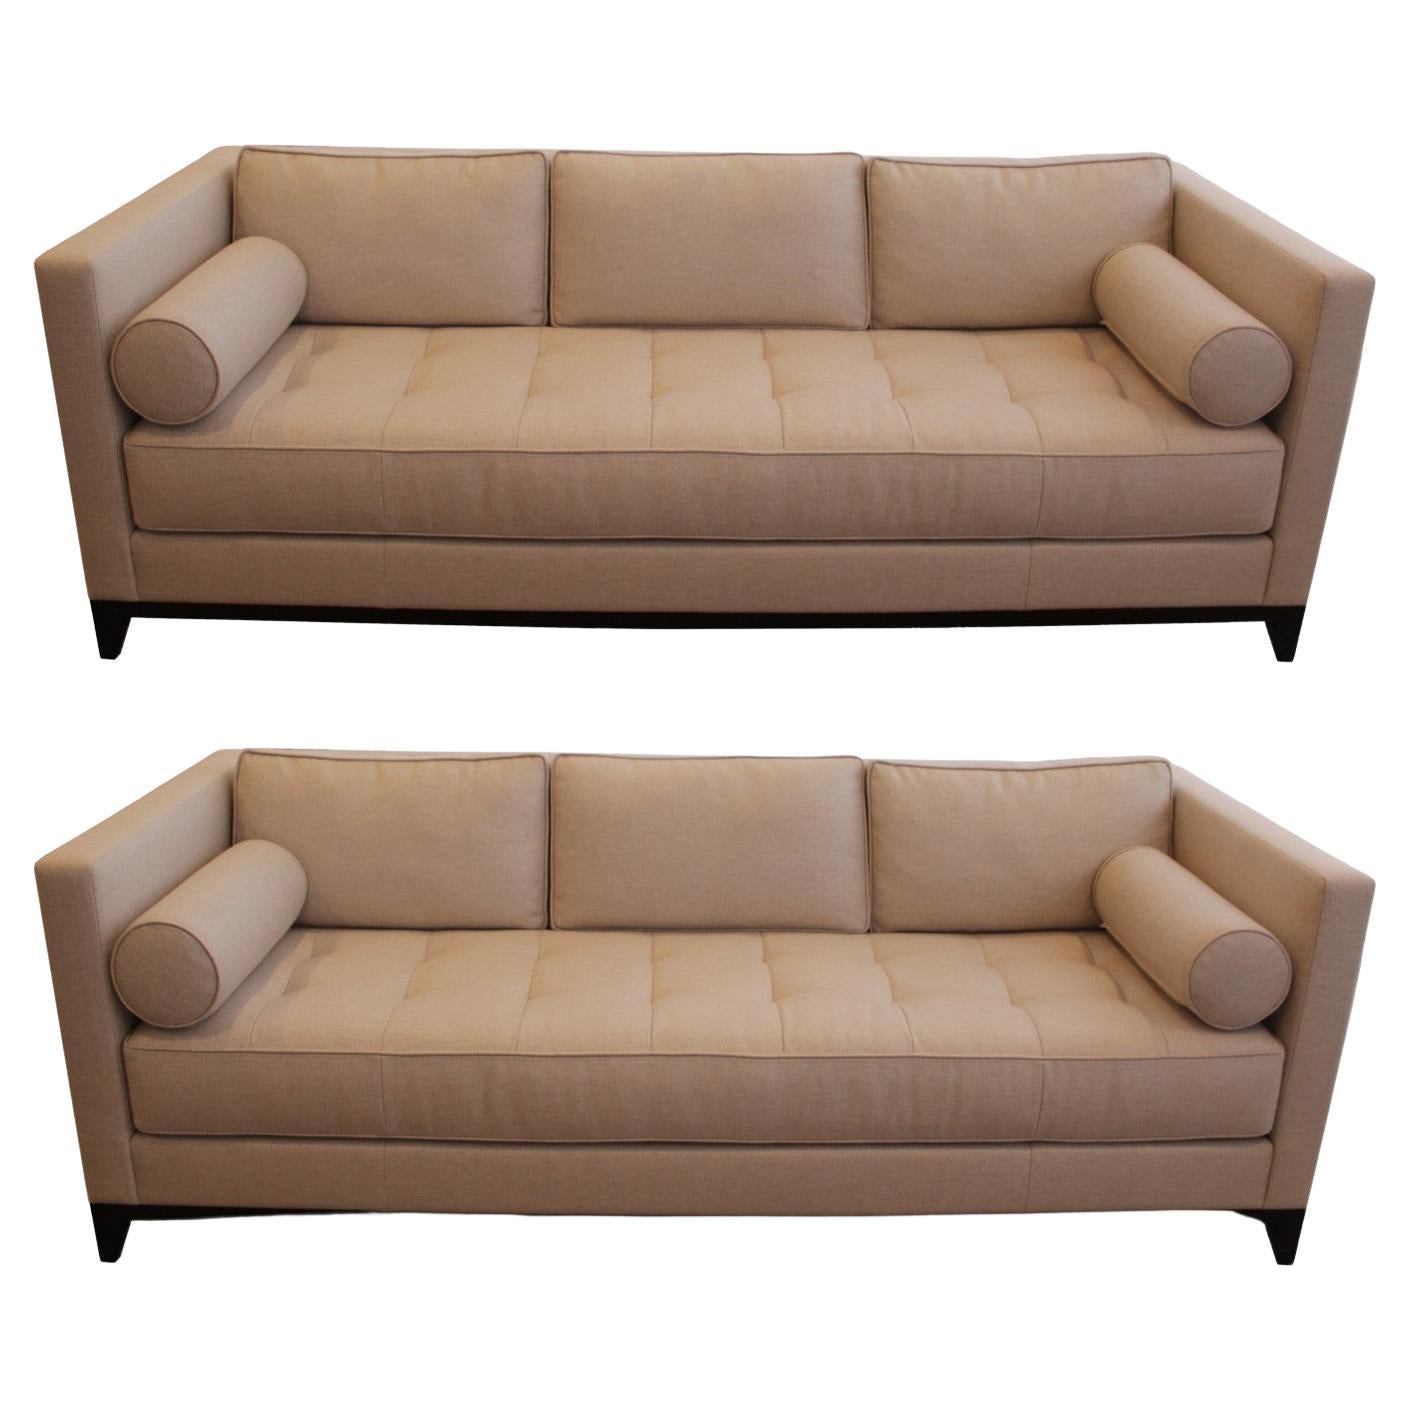 Contemporary Modern Pair of Interior Craft Sofas in Holly Hunt Fabric